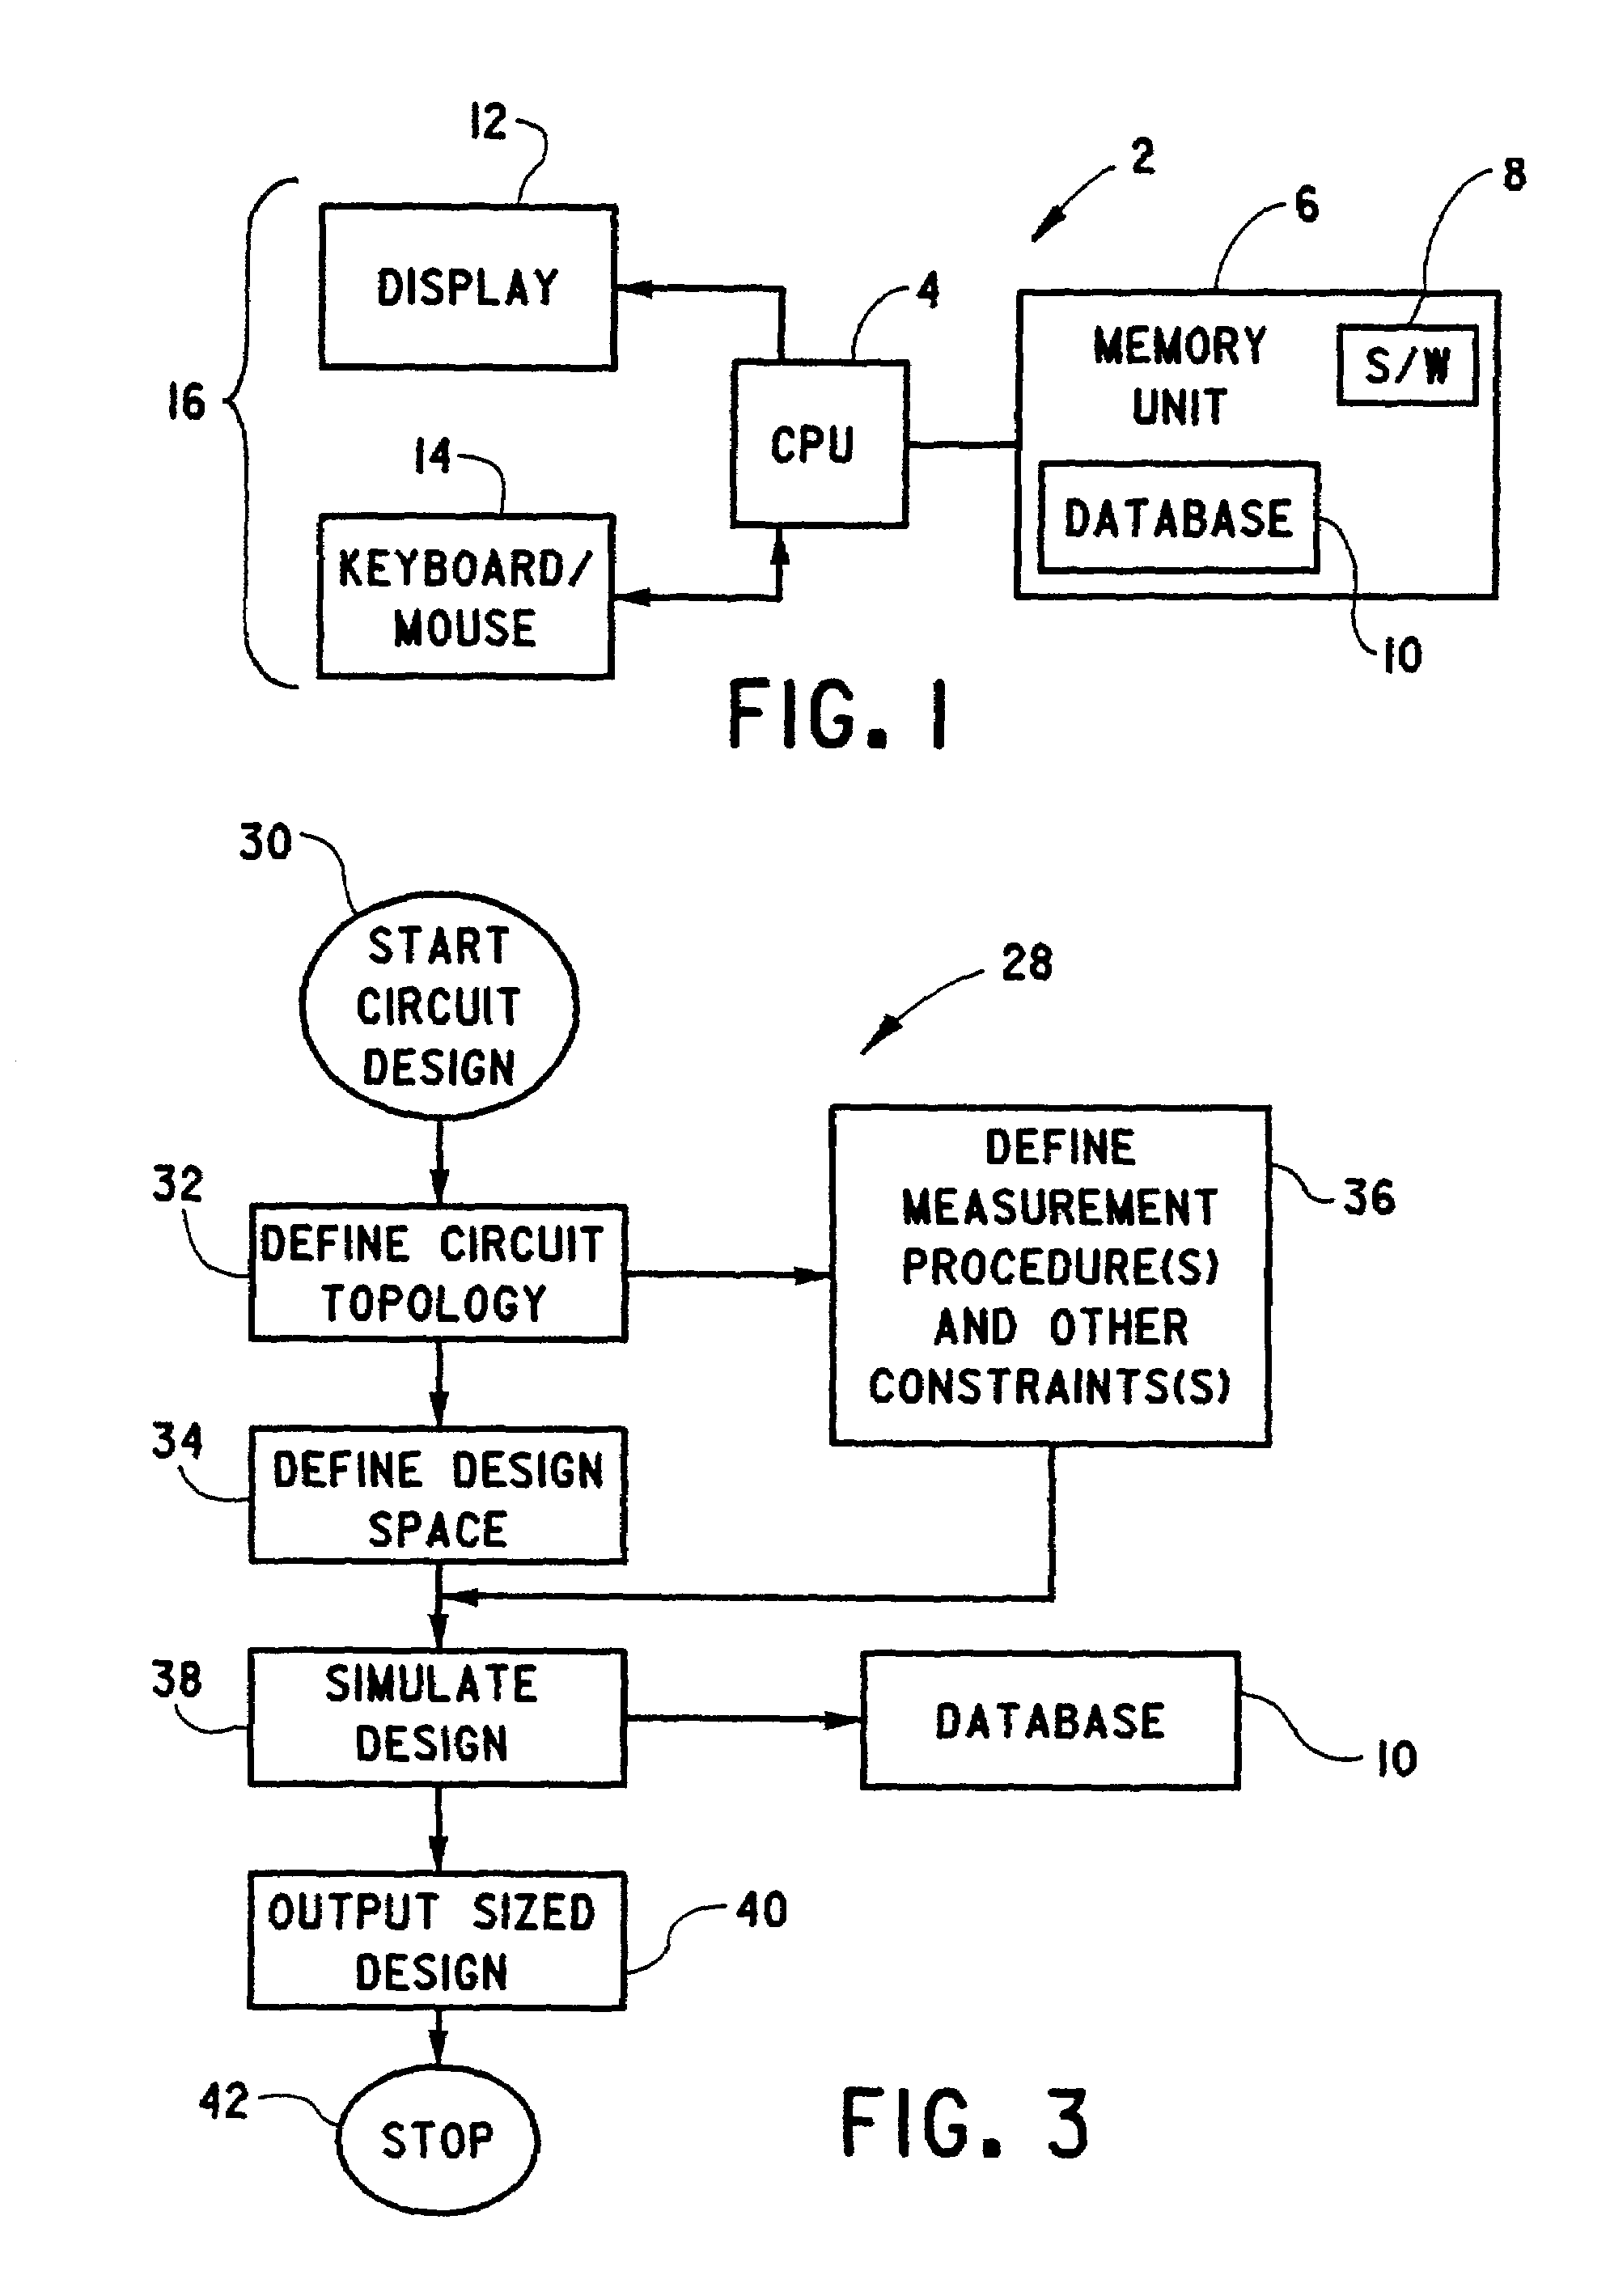 Method for automatically sizing and biasing circuits by means of a database